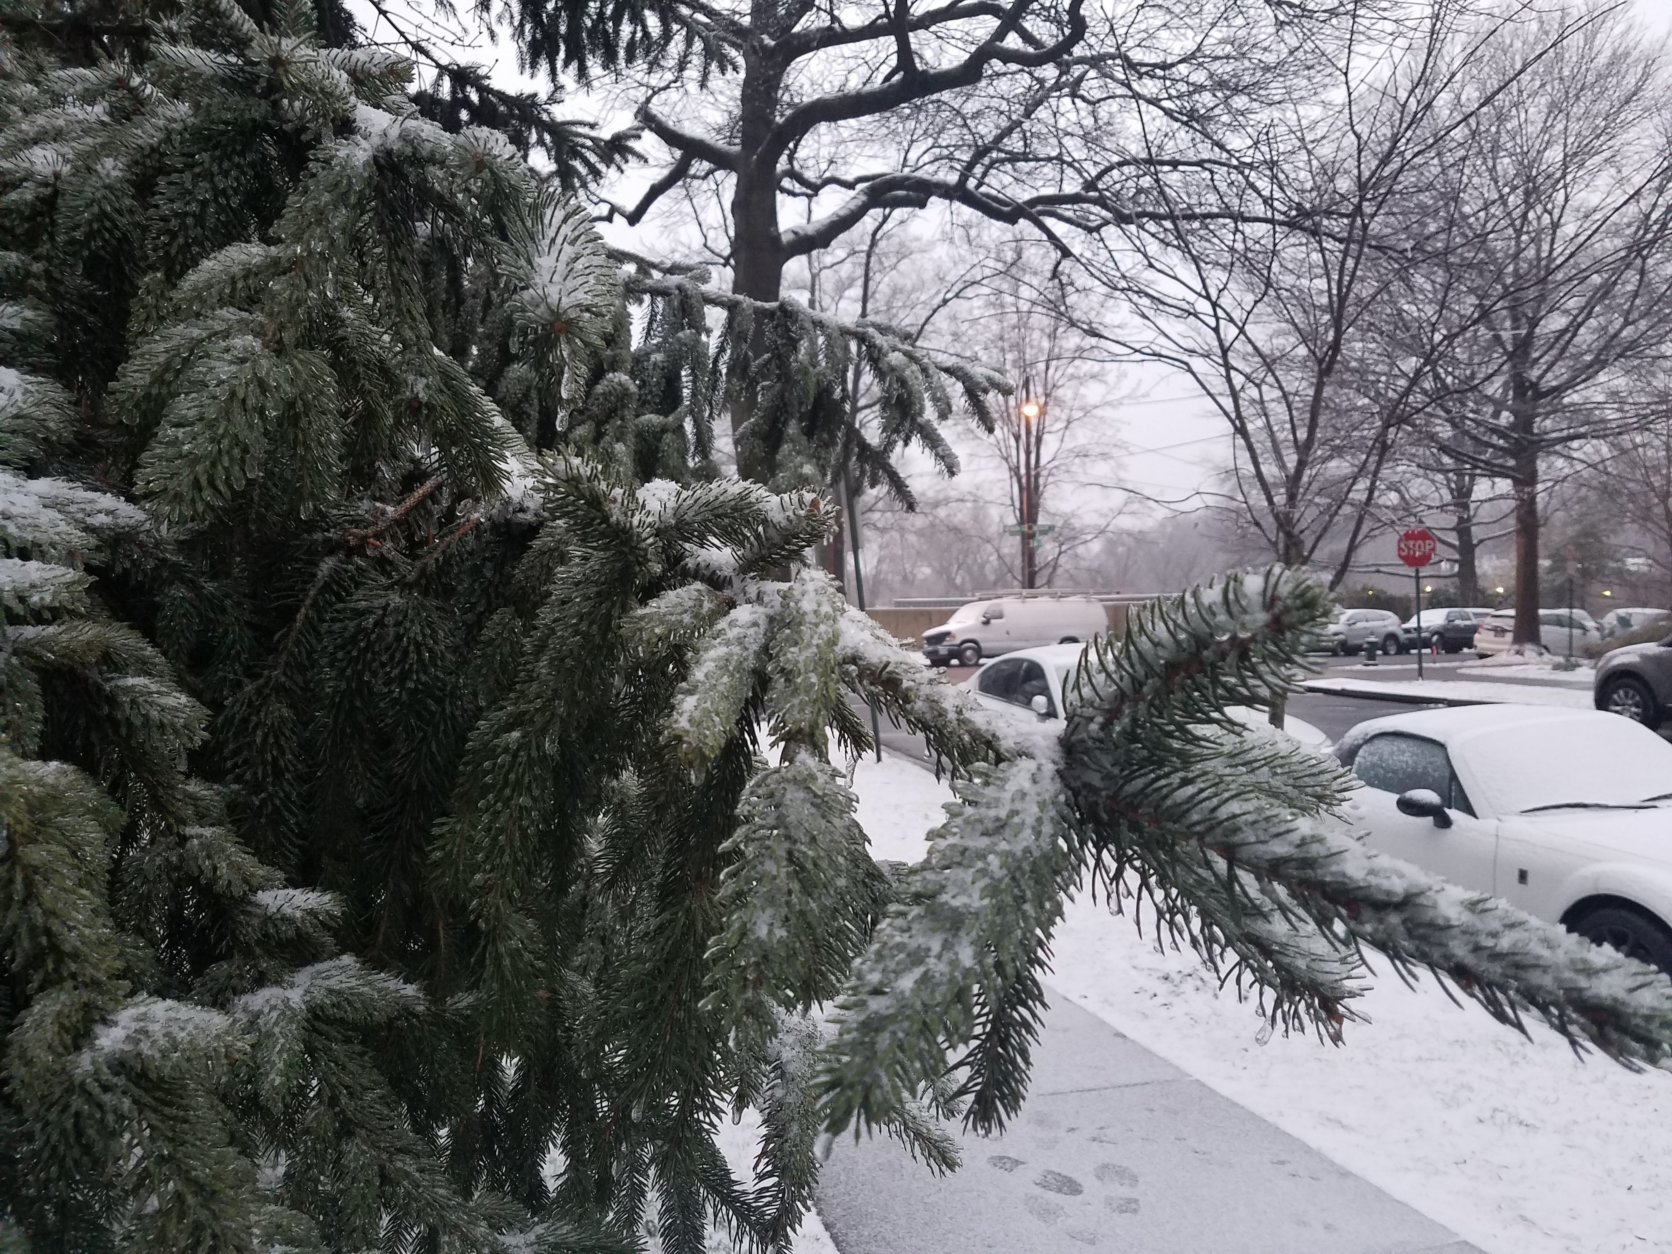 Wednesday's forecast called for plenty of snow in the Washington area. (WTOP/William Vitka)